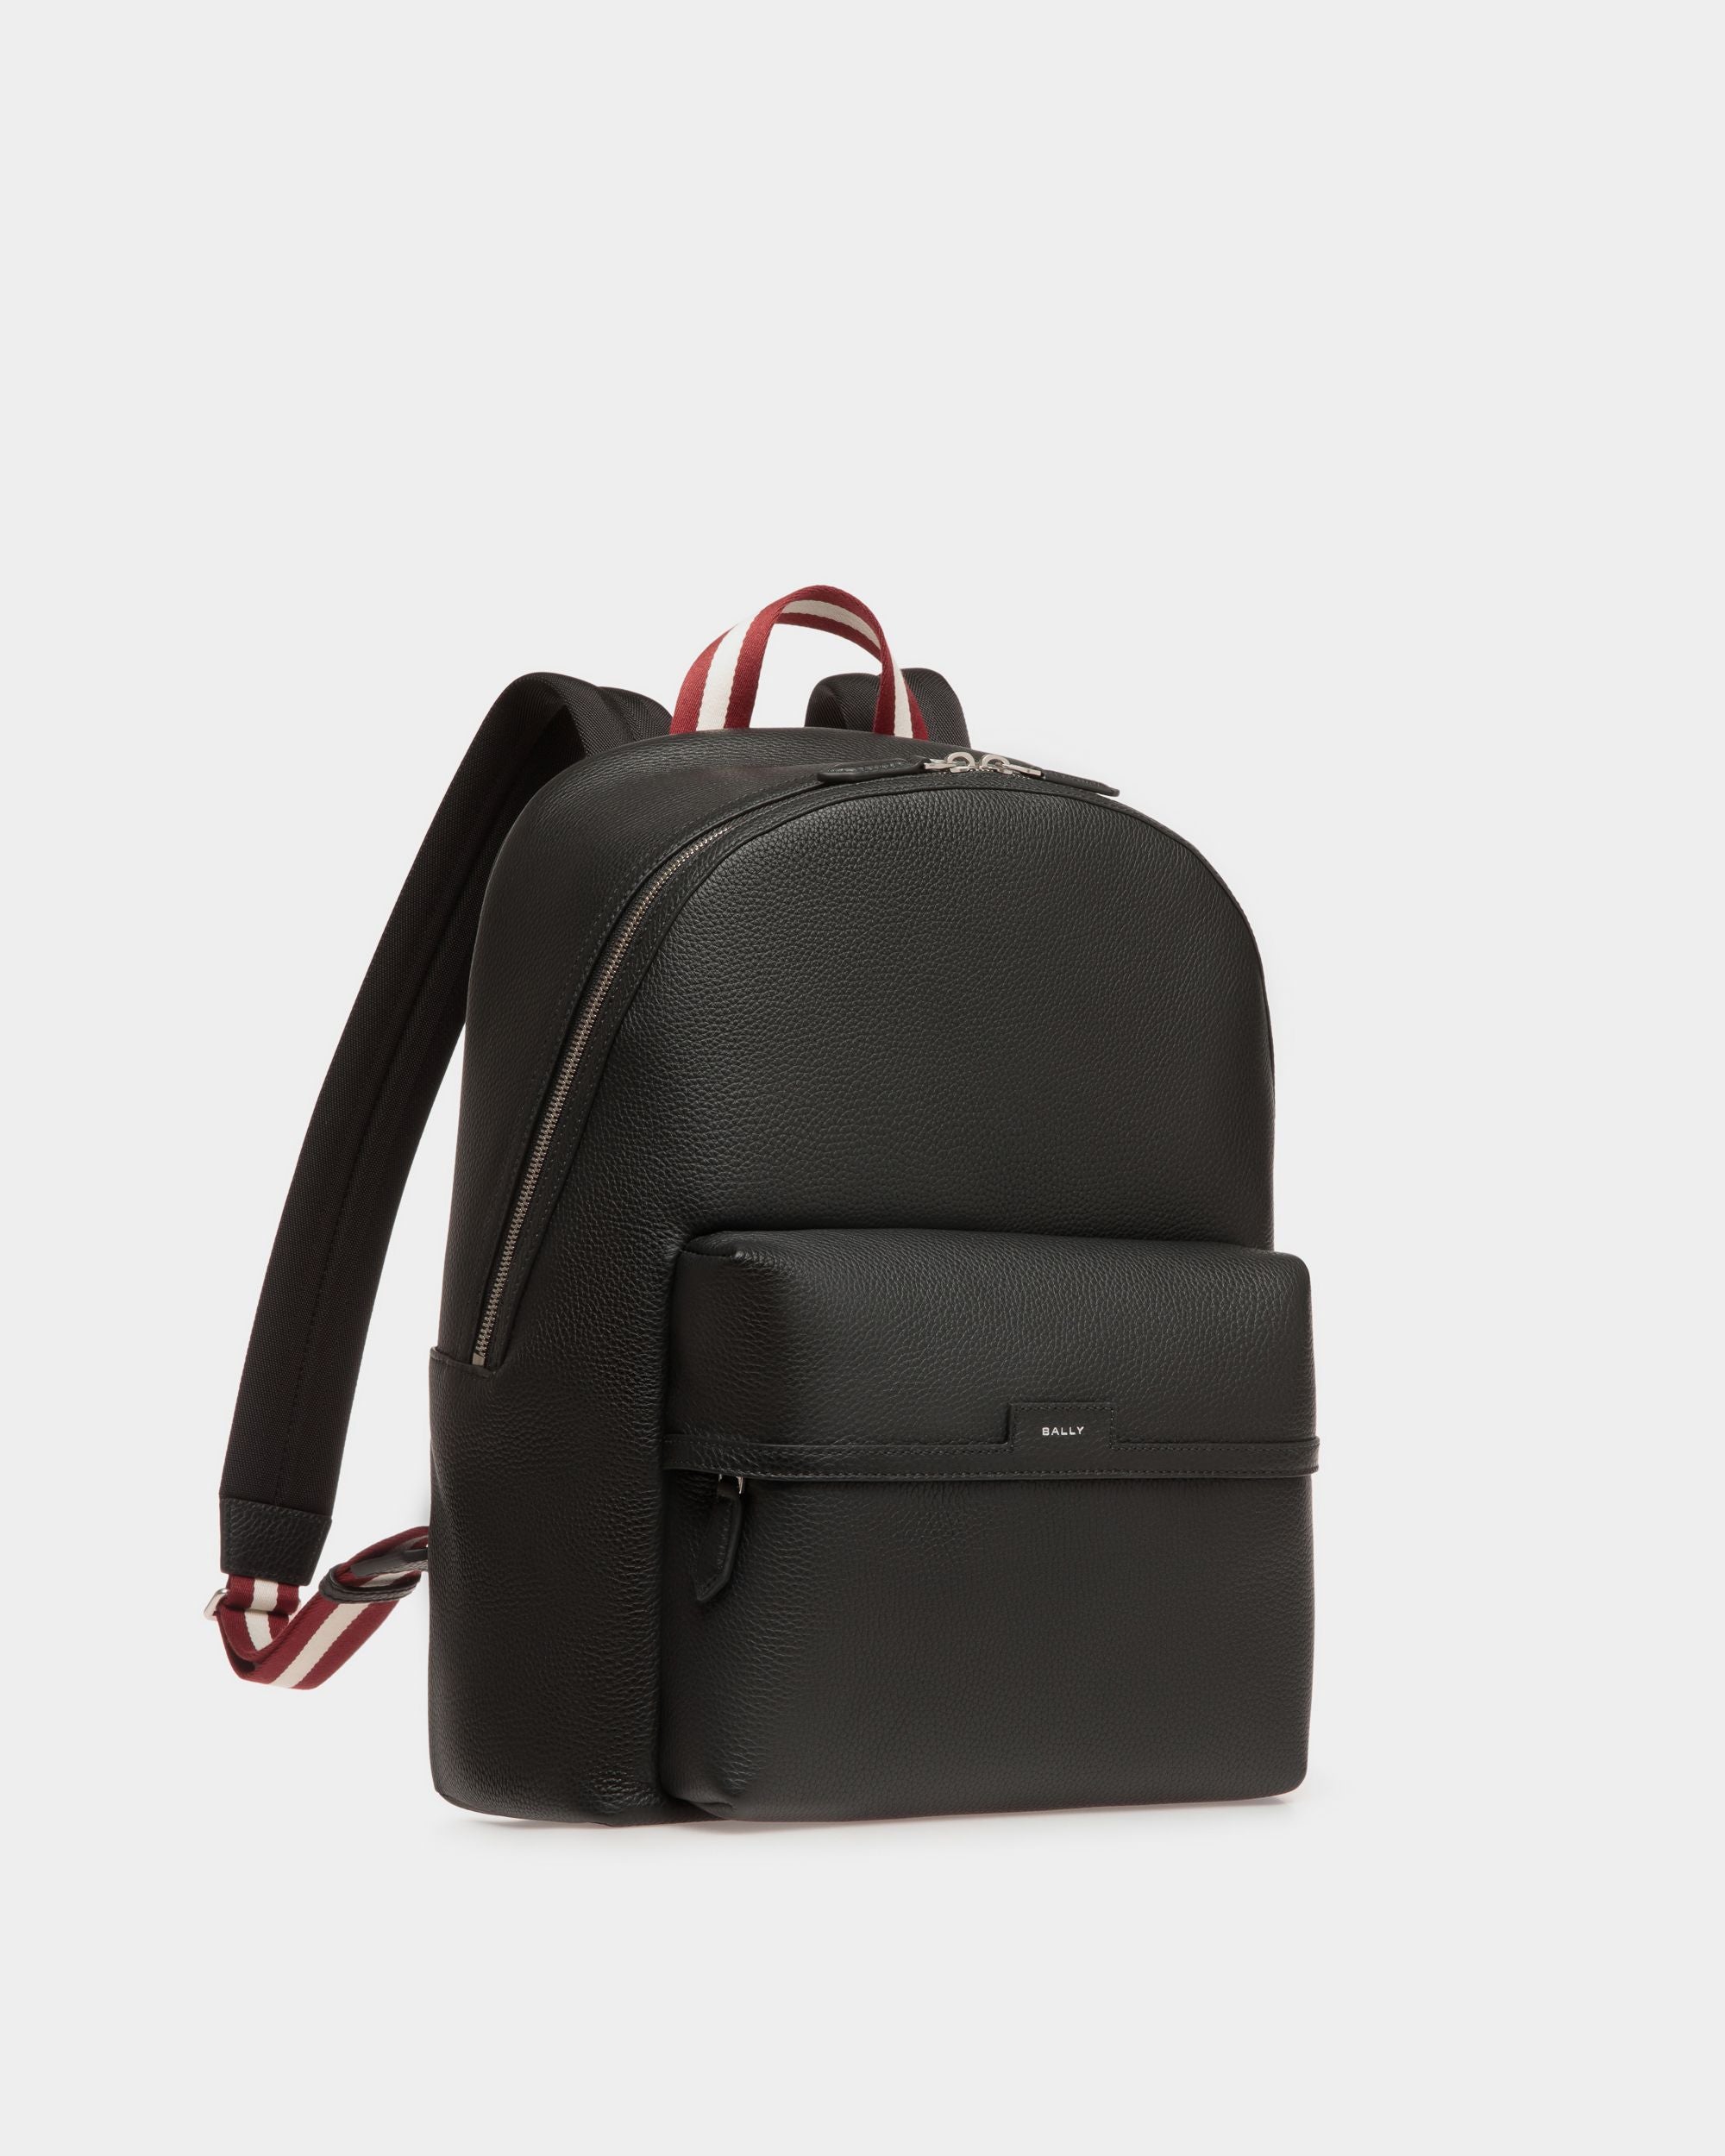 Code | Men's Backpack in Black Grained Leather | Bally | Still Life 3/4 Front